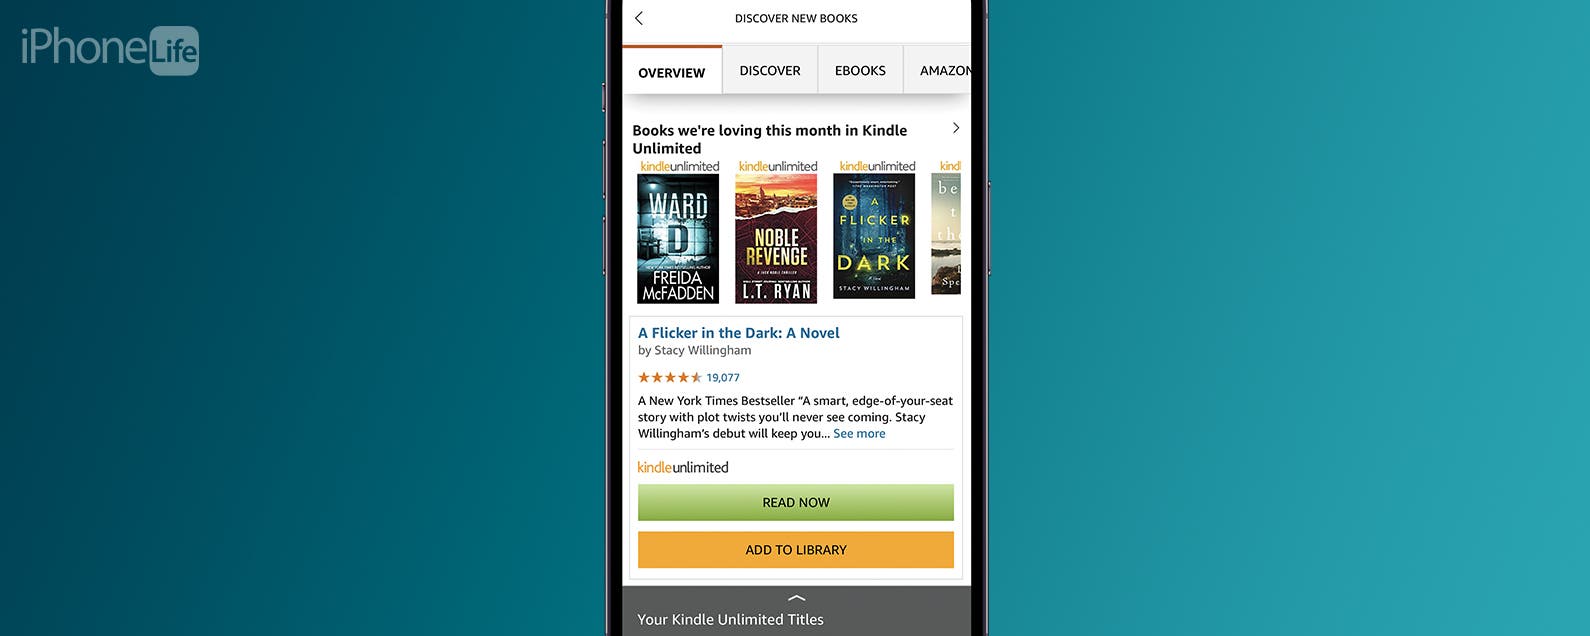 Kindle: Your free personal library you can take anywhere